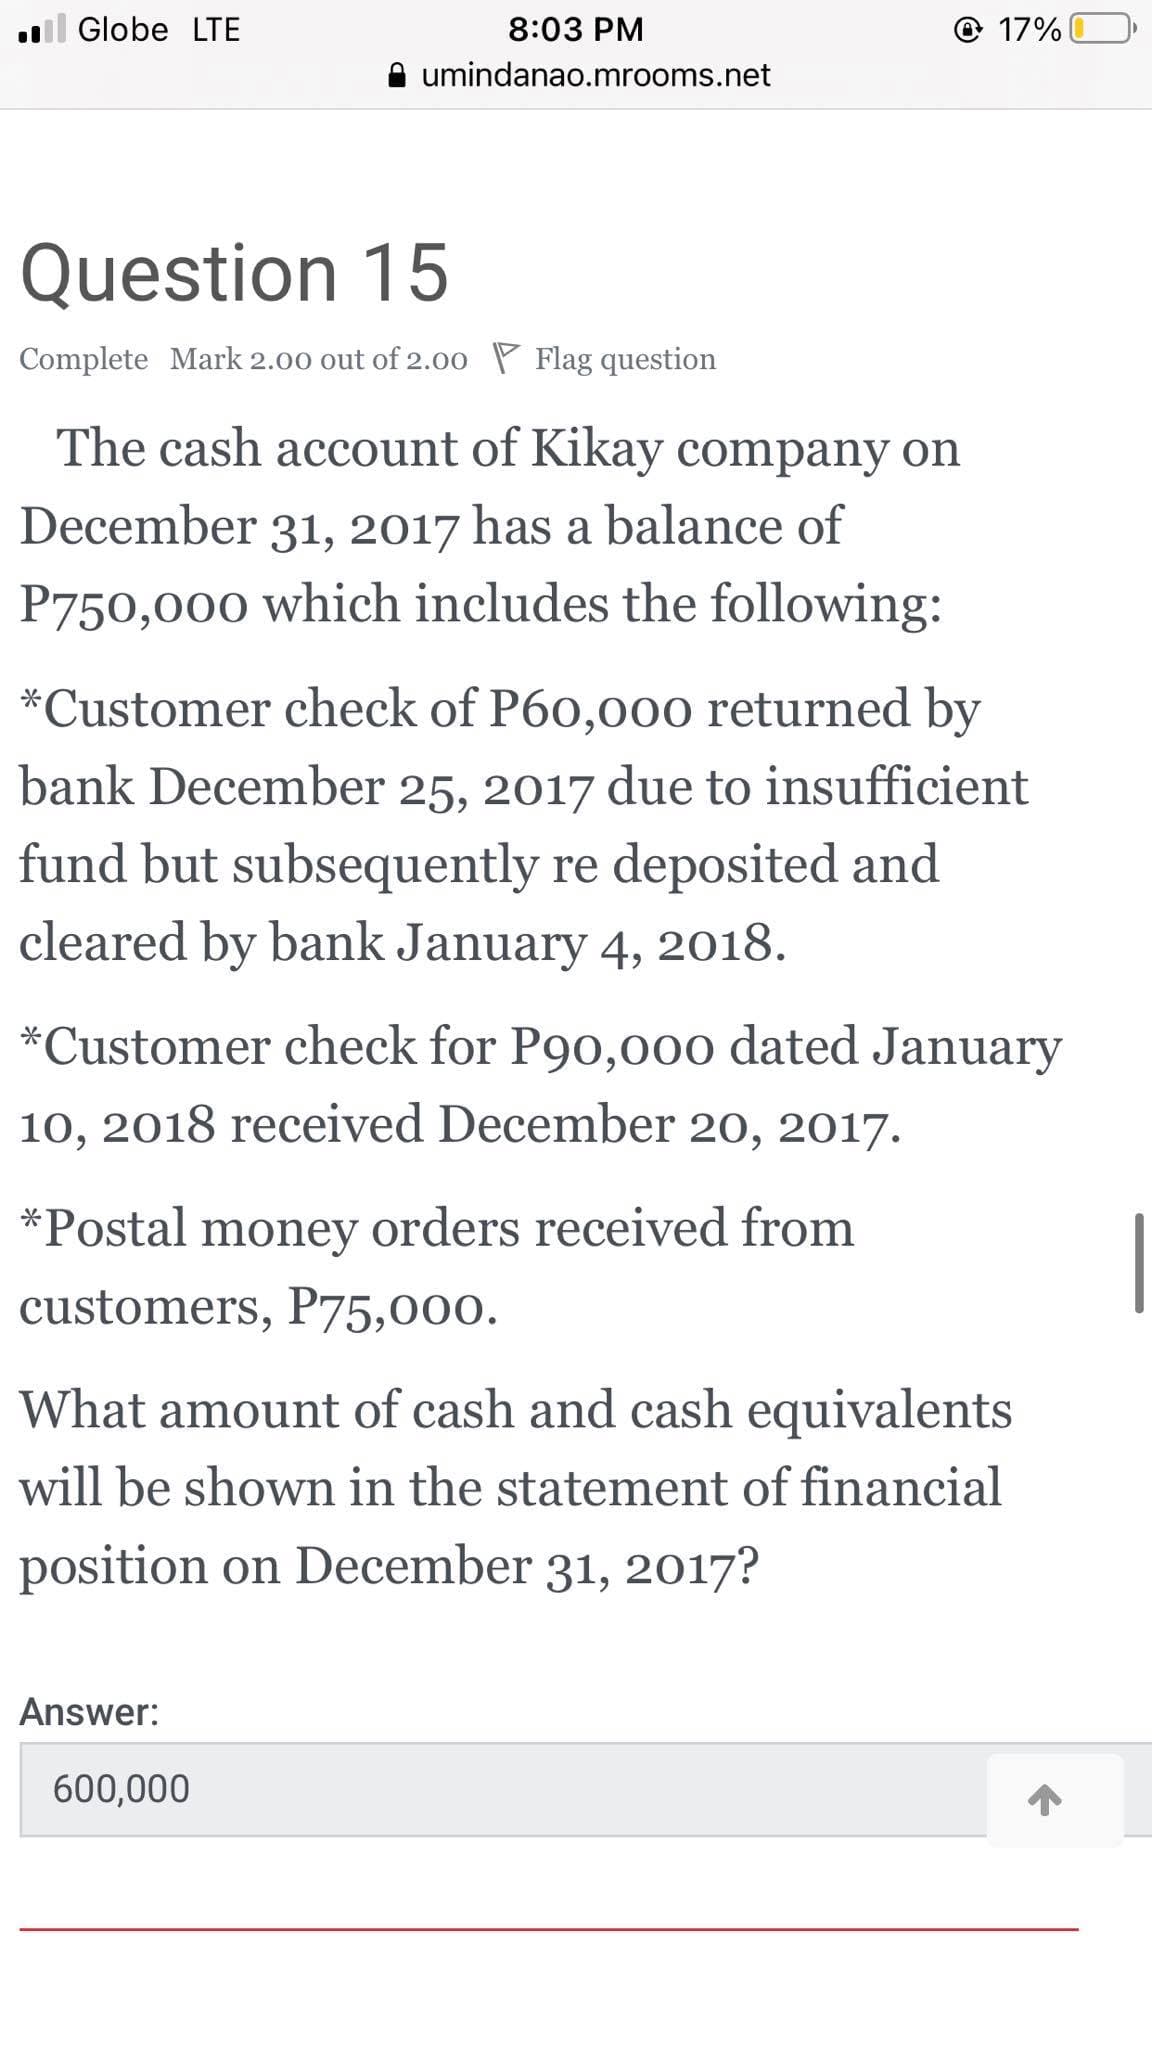 l Globe LTE
8:03 PM
© 17%
umindanao.mrooms.net
Question 15
Complete Mark 2.00 out of 2.00 P Flag question
The cash account of Kikay company on
December 31, 2017 has a balance of
P750,000 which includes the following:
*Customer check of P60,00o0 returned by
bank December 25, 2017 due to insufficient
fund but subsequently re deposited and
cleared by bank January 4, 2018.
*Customer check for P90,00o dated January
10, 2018 received December 20, 2017.
*Postal money orders received from
customers, P75,000.
What amount of cash and cash equivalents
will be shown in the statement of financial
position on December 31, 2017?
Answer:
600,000
